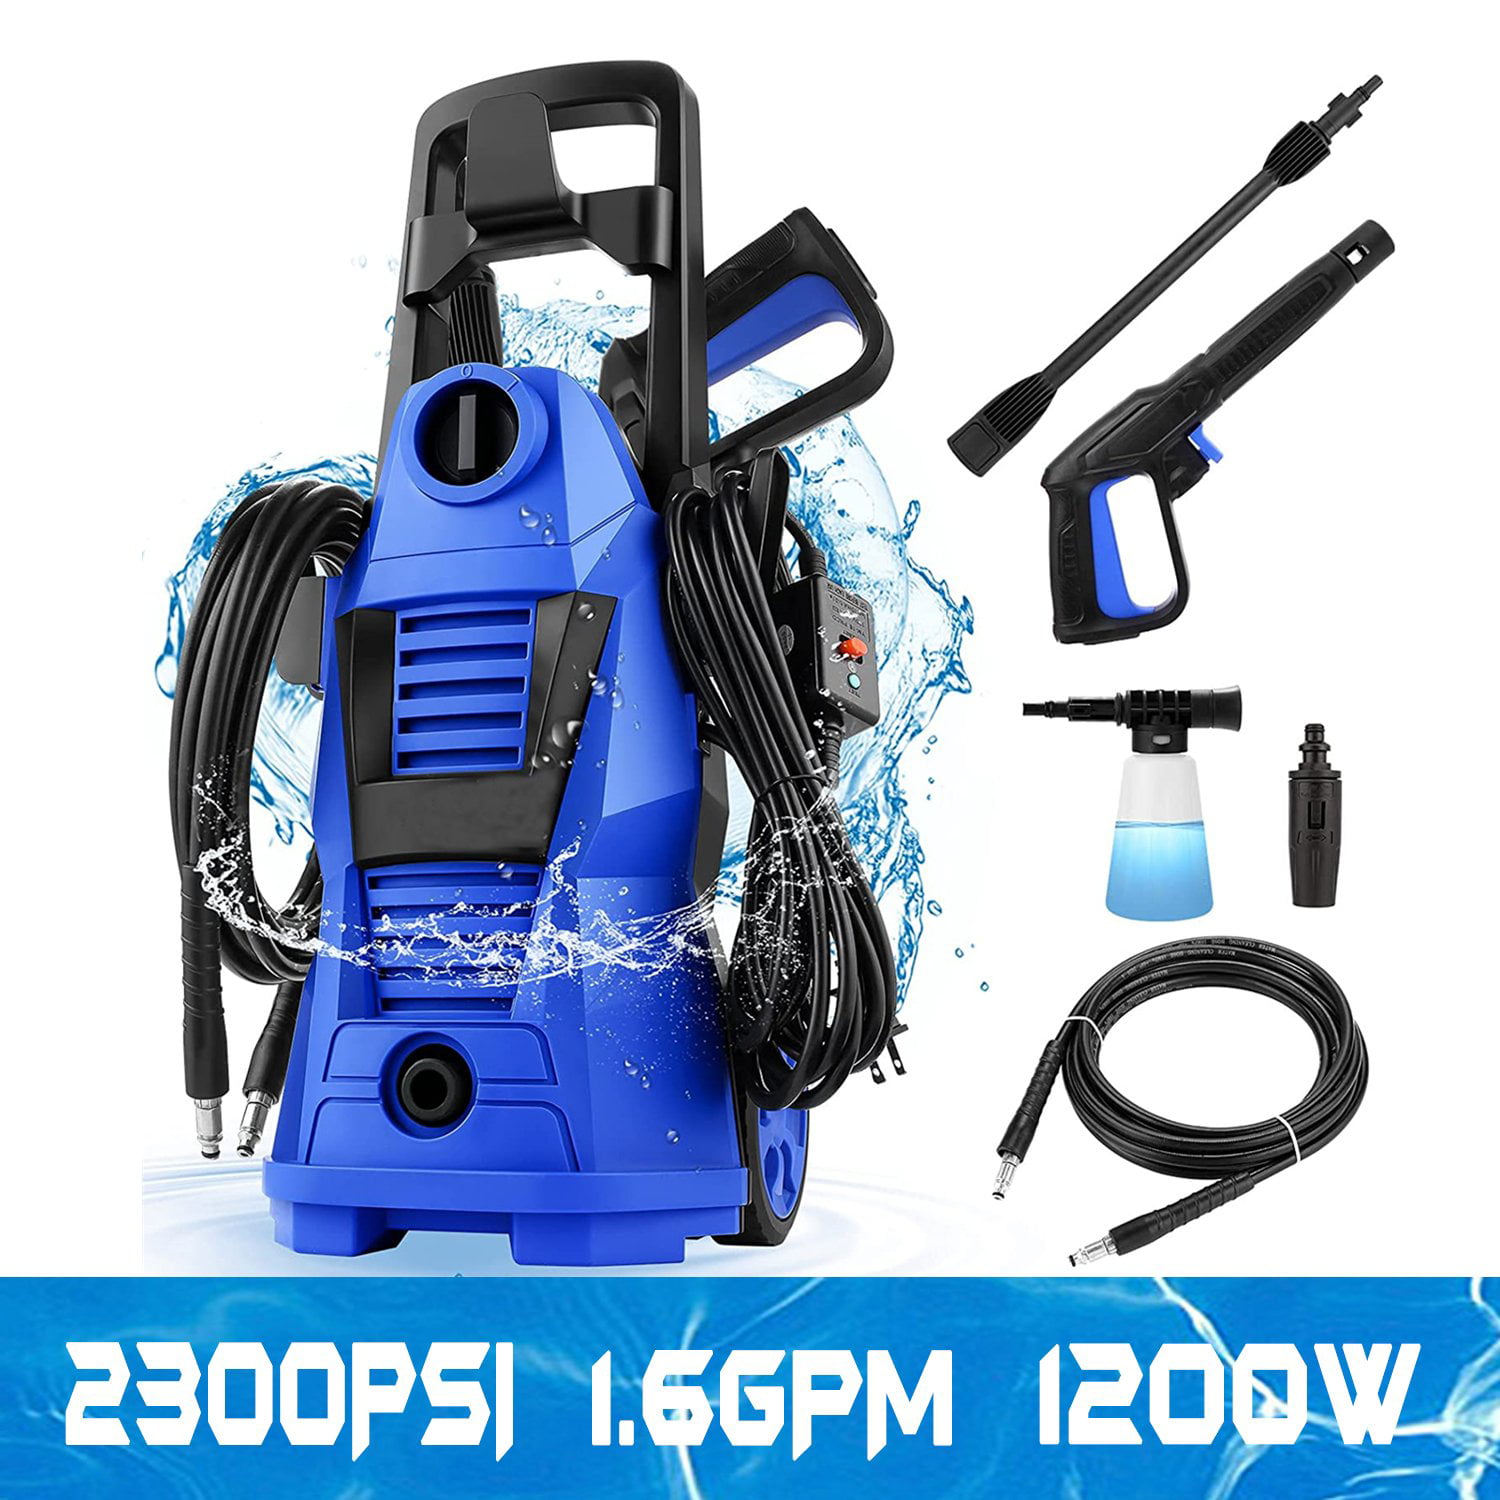 Details about   3800PSI 3.0GPM Electric Pressure Washer 2000W Water Cleaner Machine Sprayer USA 